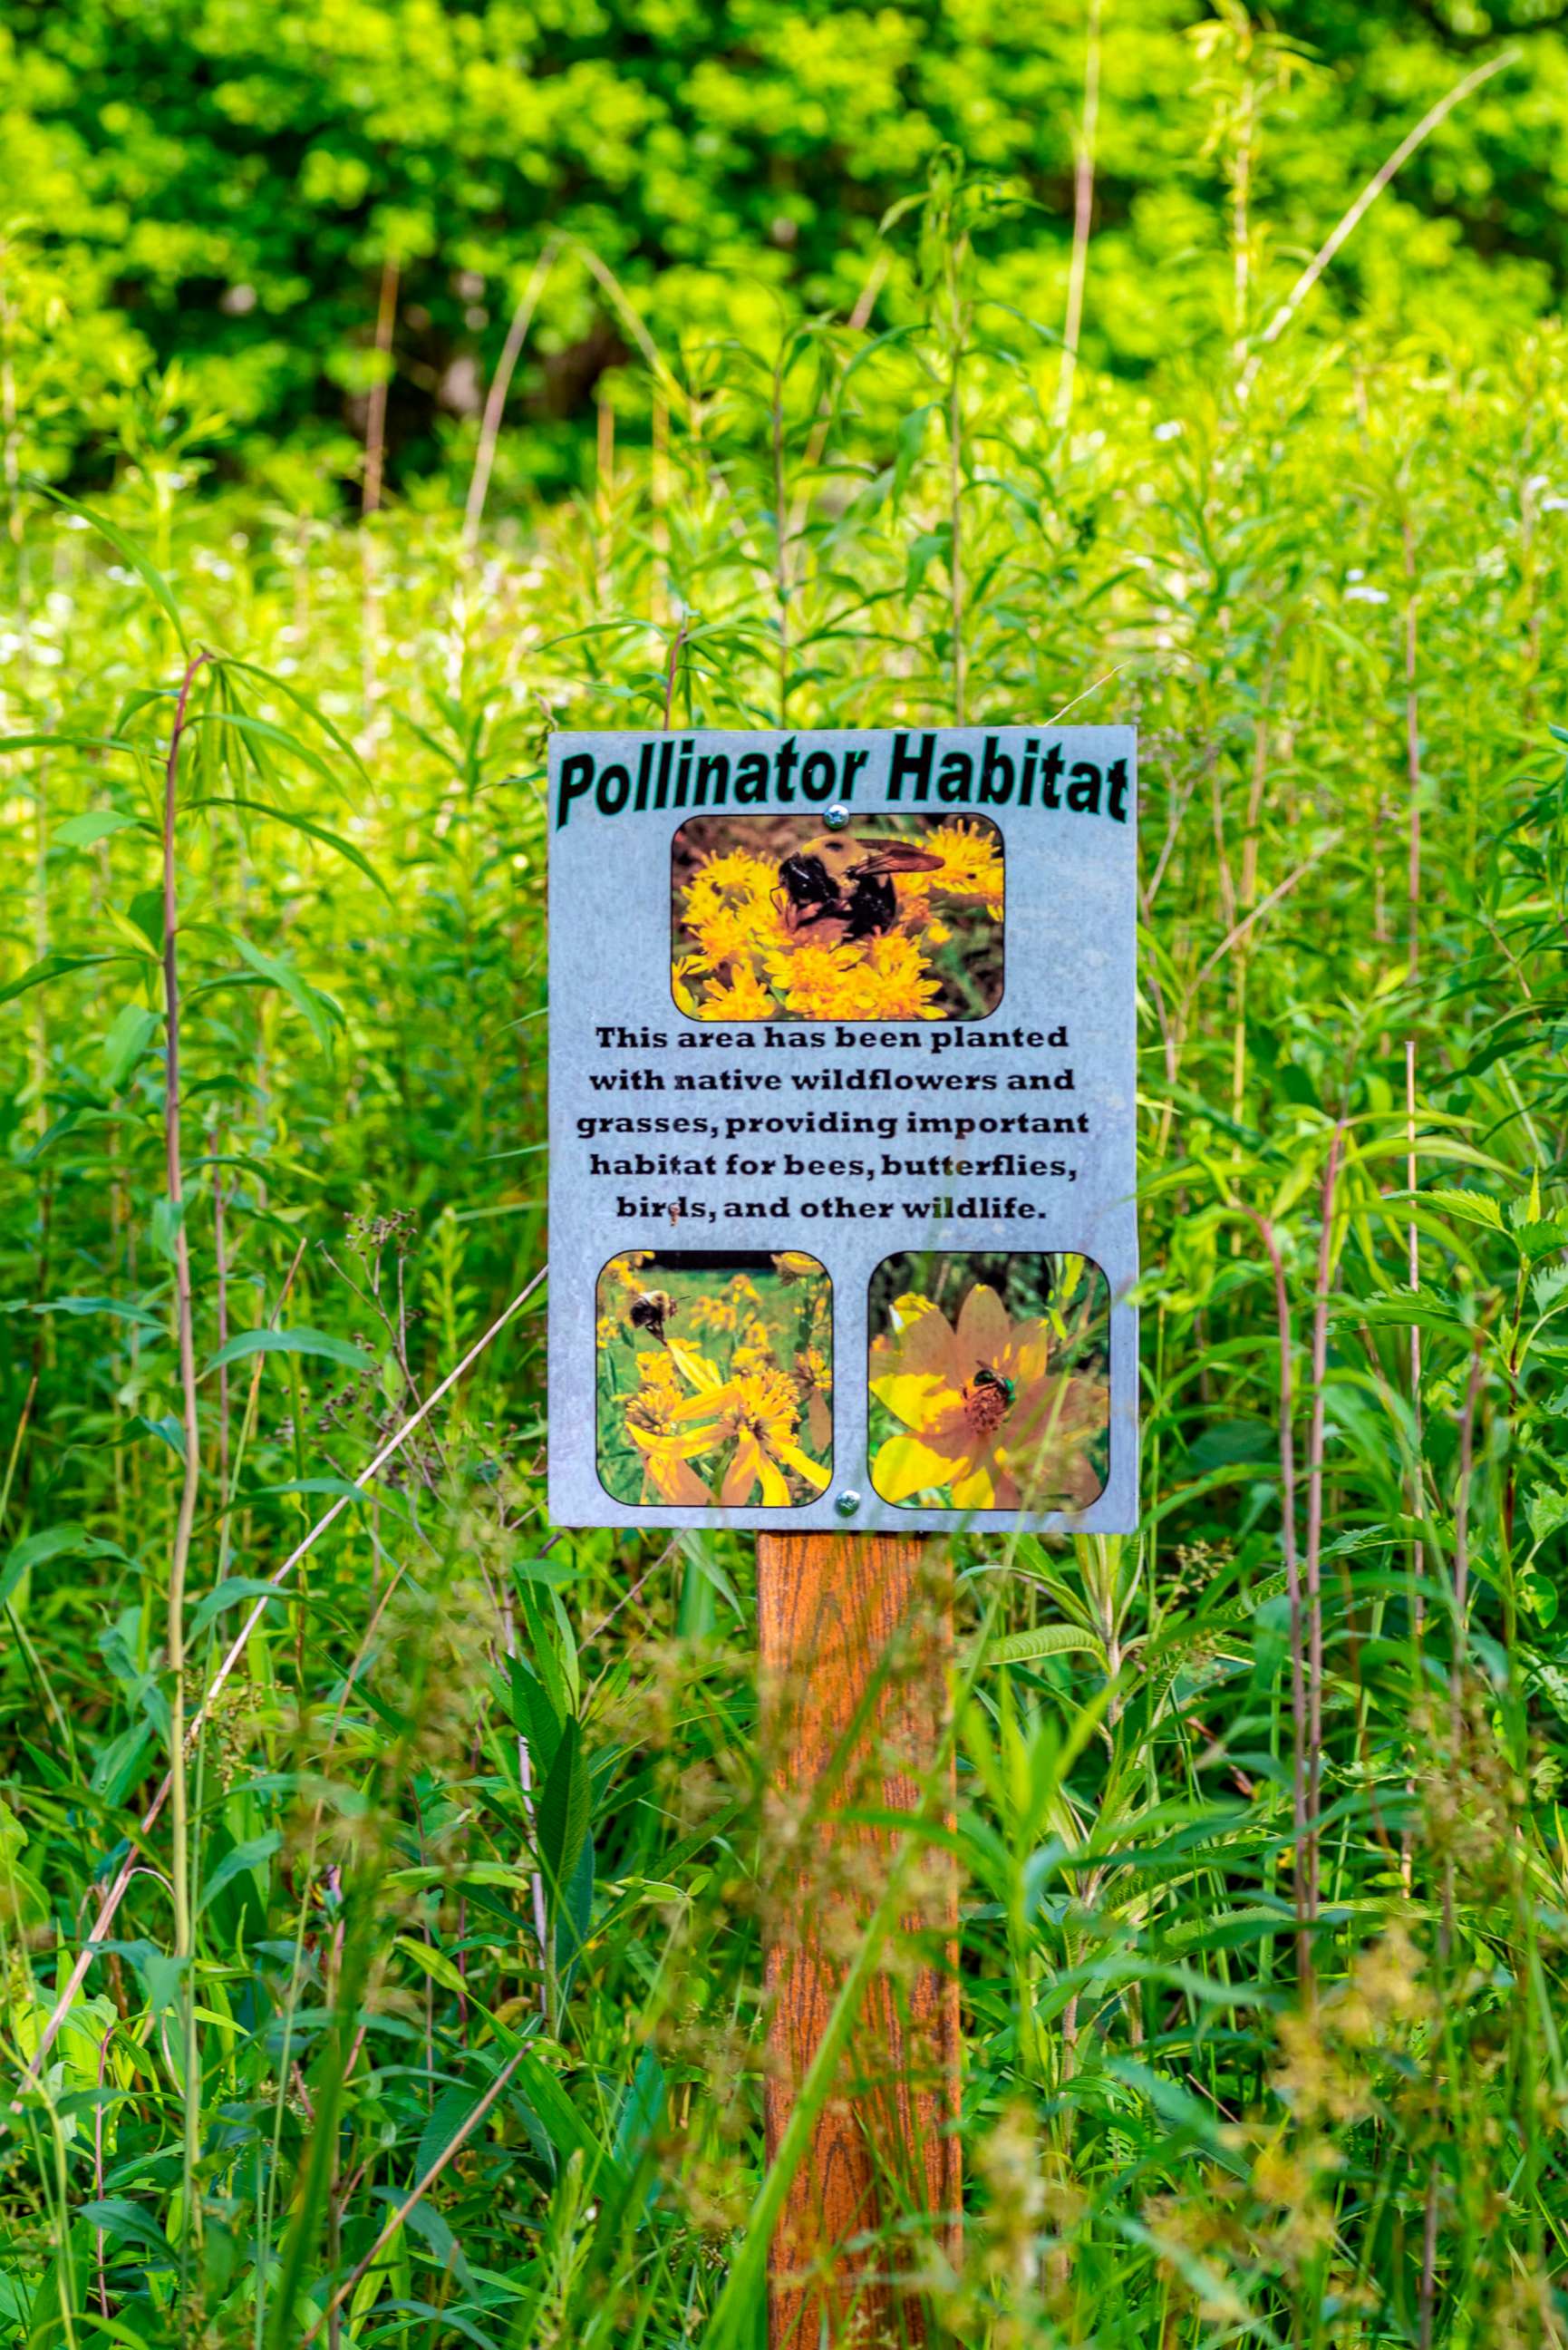 PHOTO: A sign indicating a Pollinator Habitat in a protected national forest meadow in Kentucky.